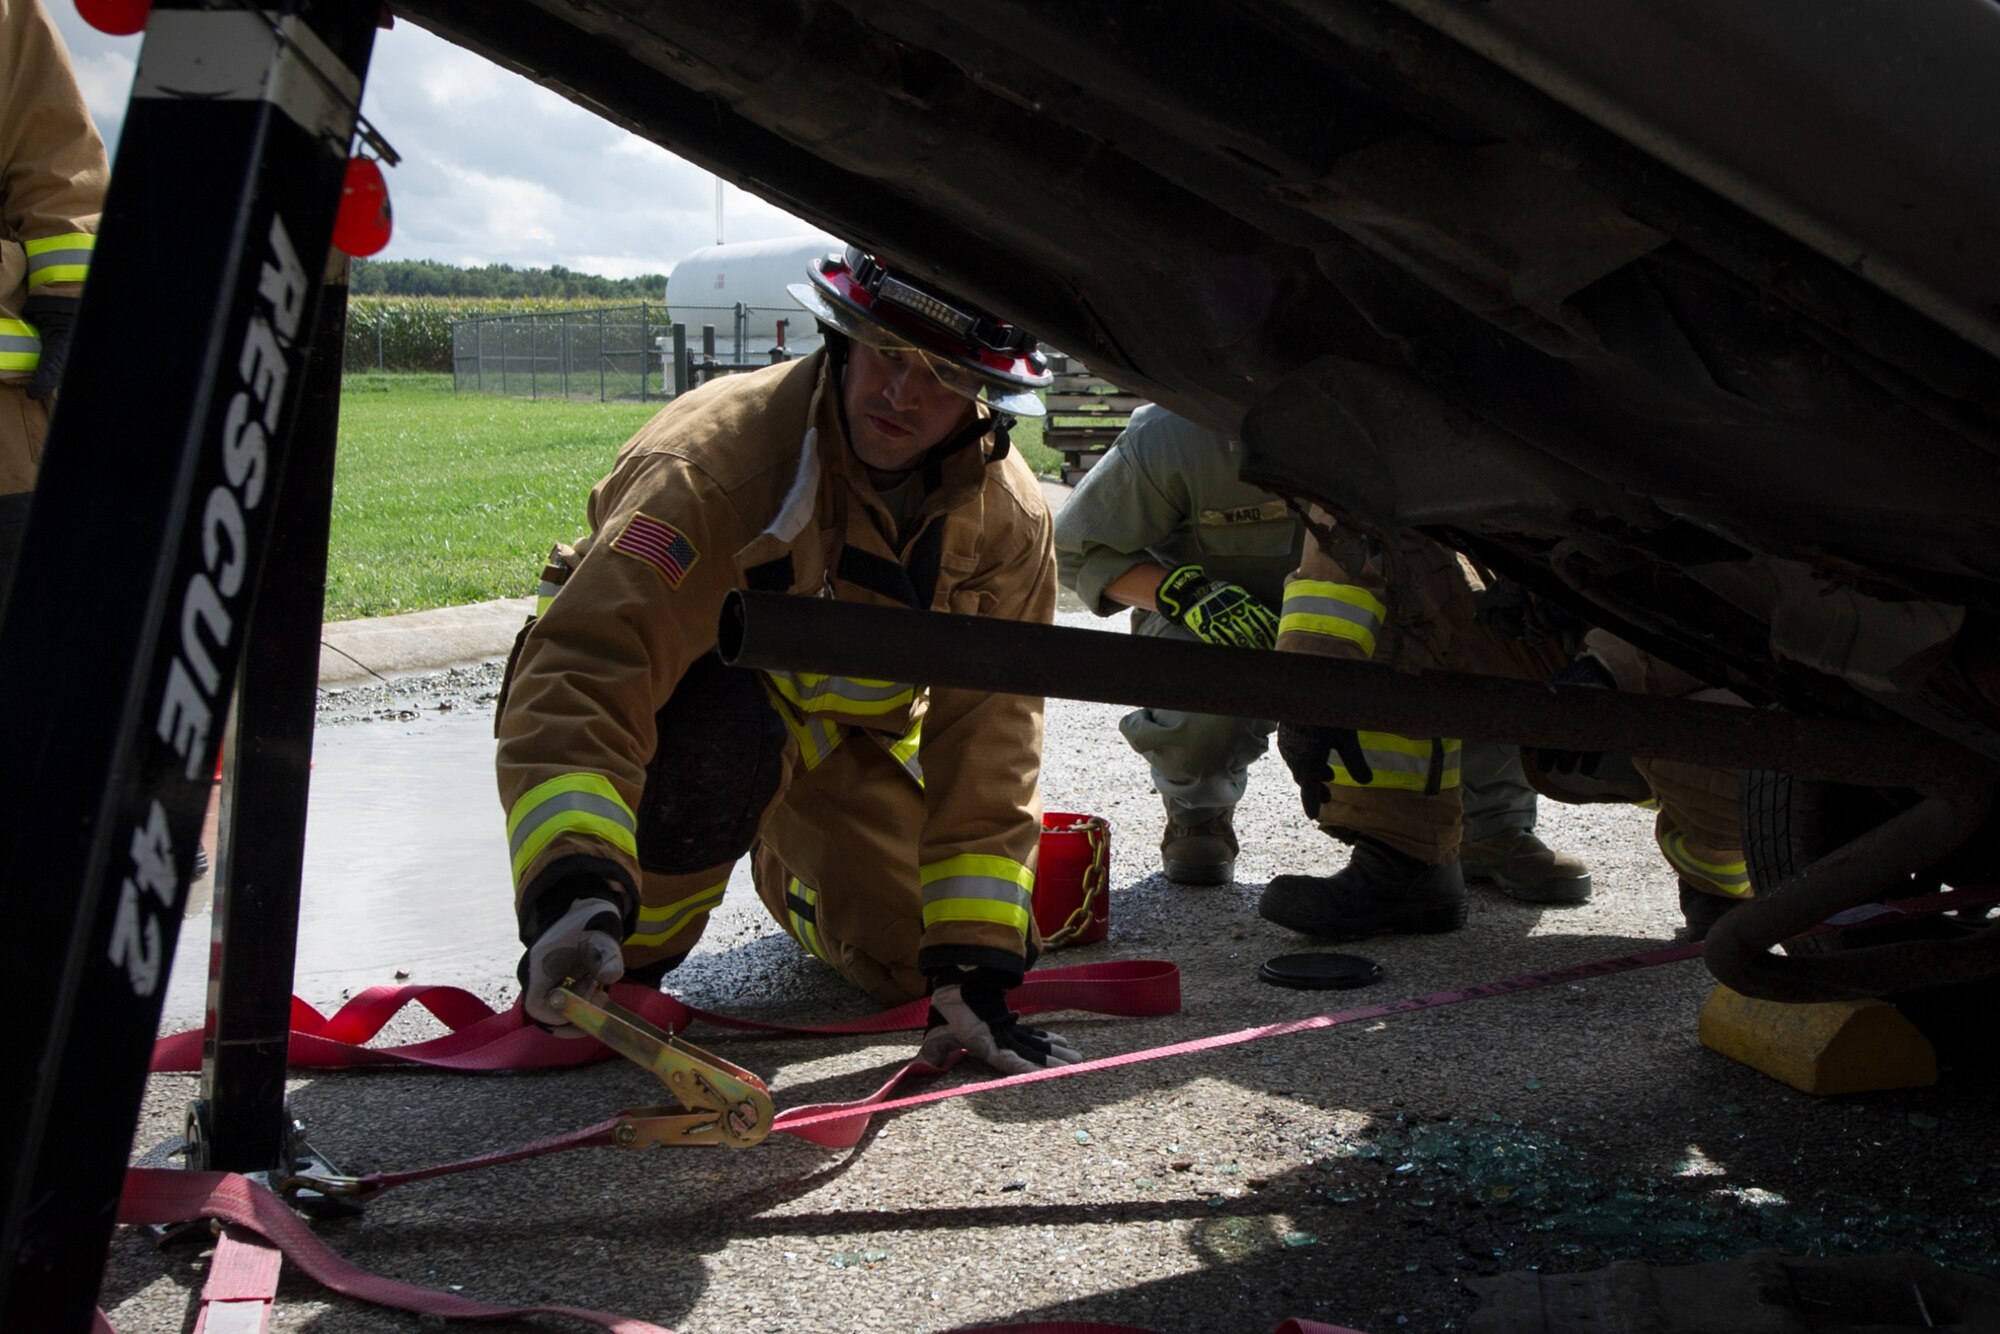 Staff Sgt. Nicholas Delaurentis, 434th Civil Engineer Squadron firefighter, adjusts struts to stabilize a vehicle in a simulated auto accident during an exercise Sept. 10, 2016 at Grissom Air Reserve Base, Ind. The exercise provided a unique training opportunity for CES Airmen. (U.S. Air Force photo/Staff Sgt. Katrina Heikkinen)